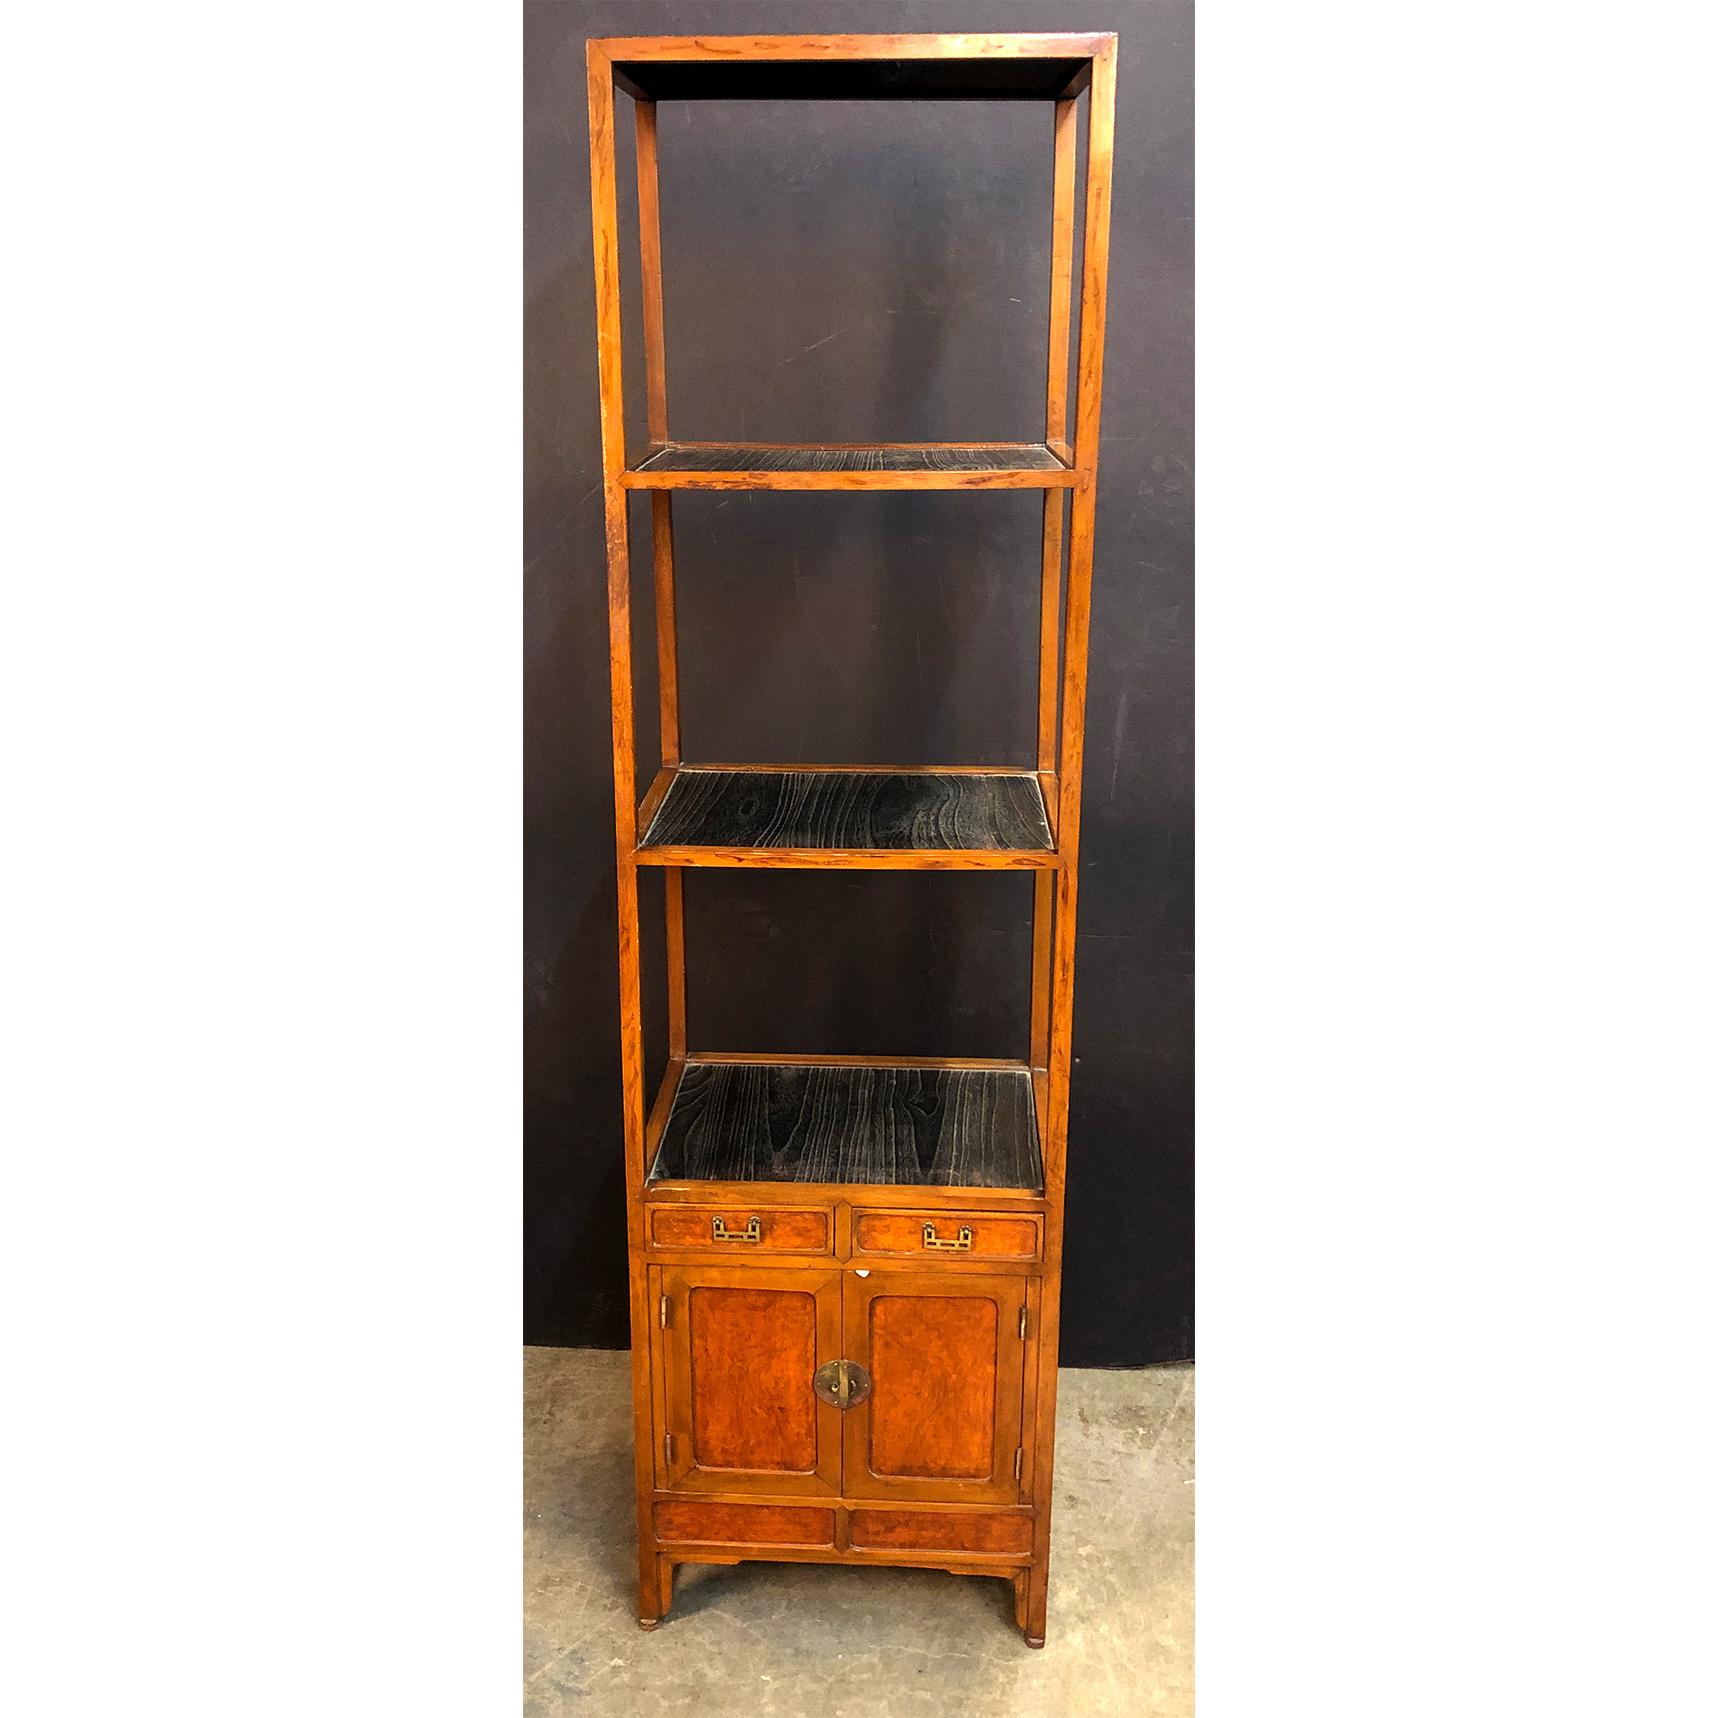 A antique Chinese hardwood and ebonized four-tier tall étagère with lower cabinet section.